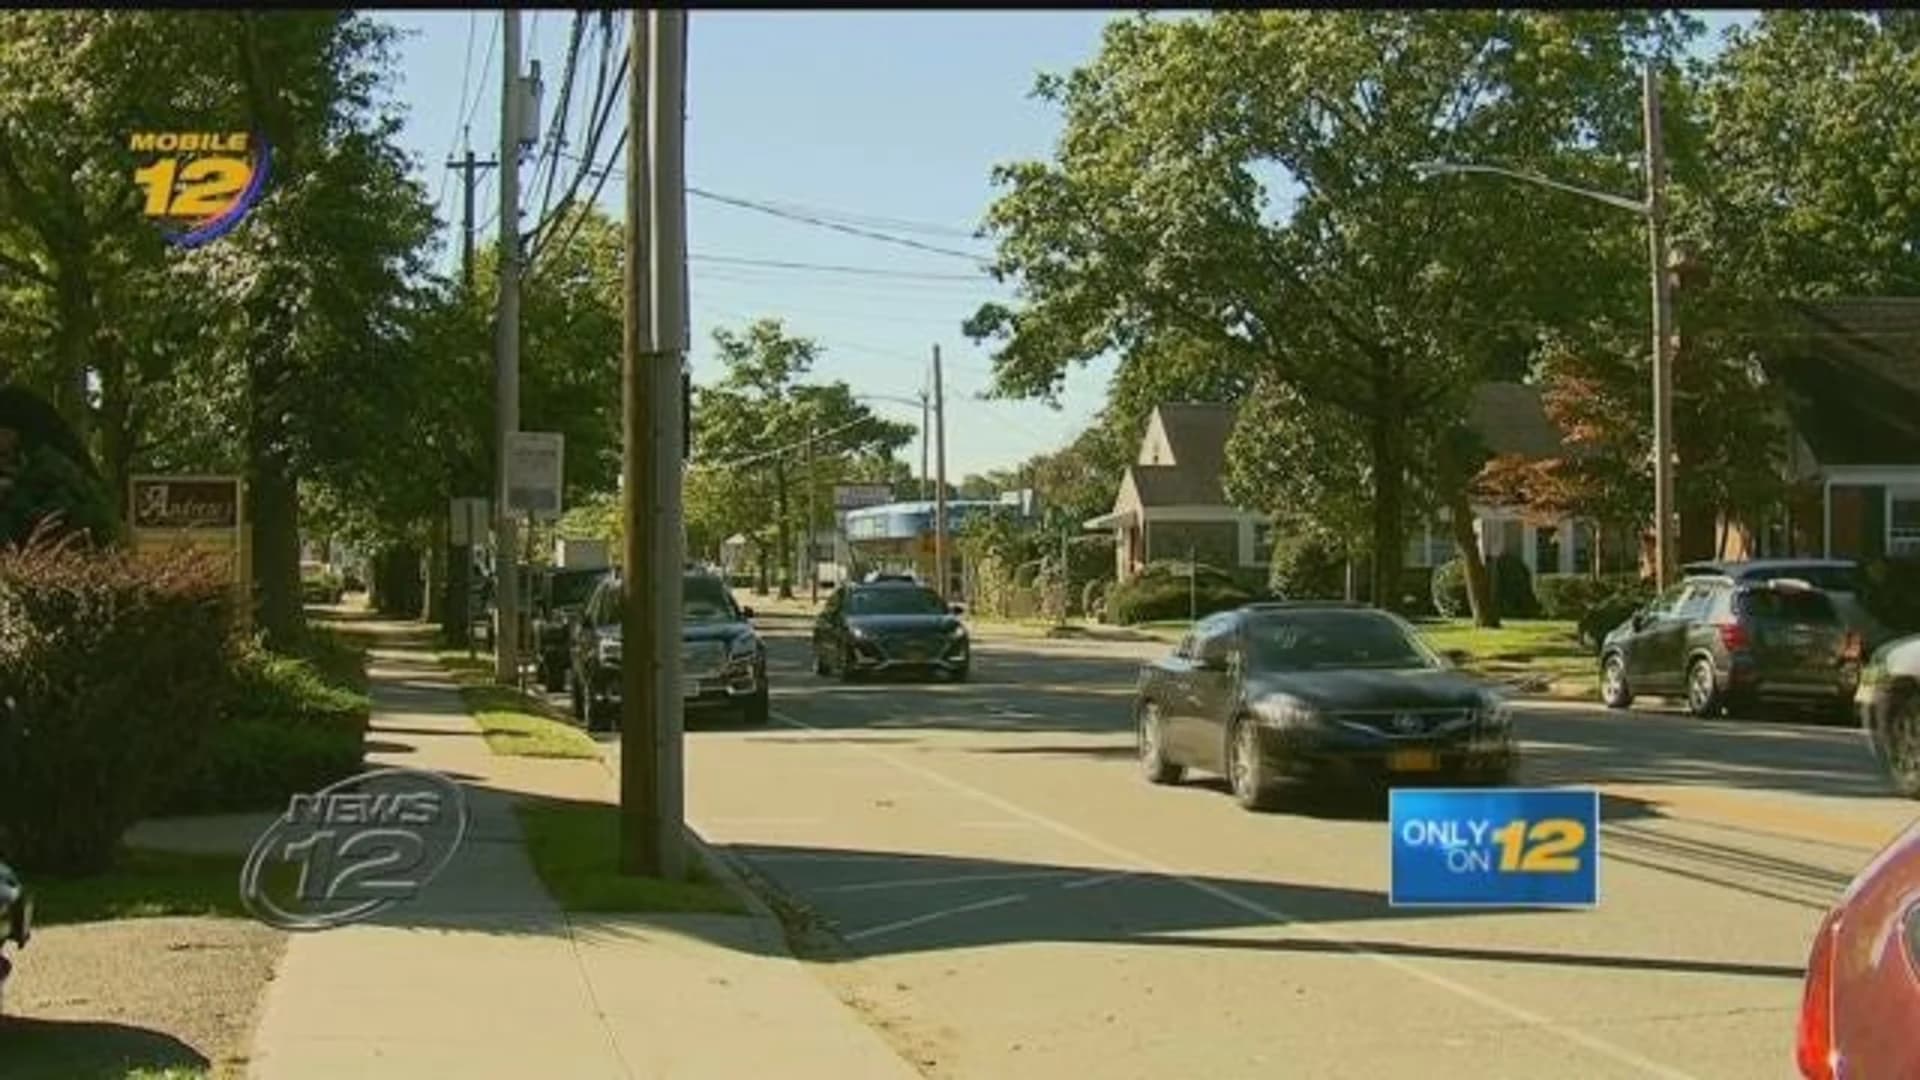 Neighbors call for safety measures to curb speeding traffic